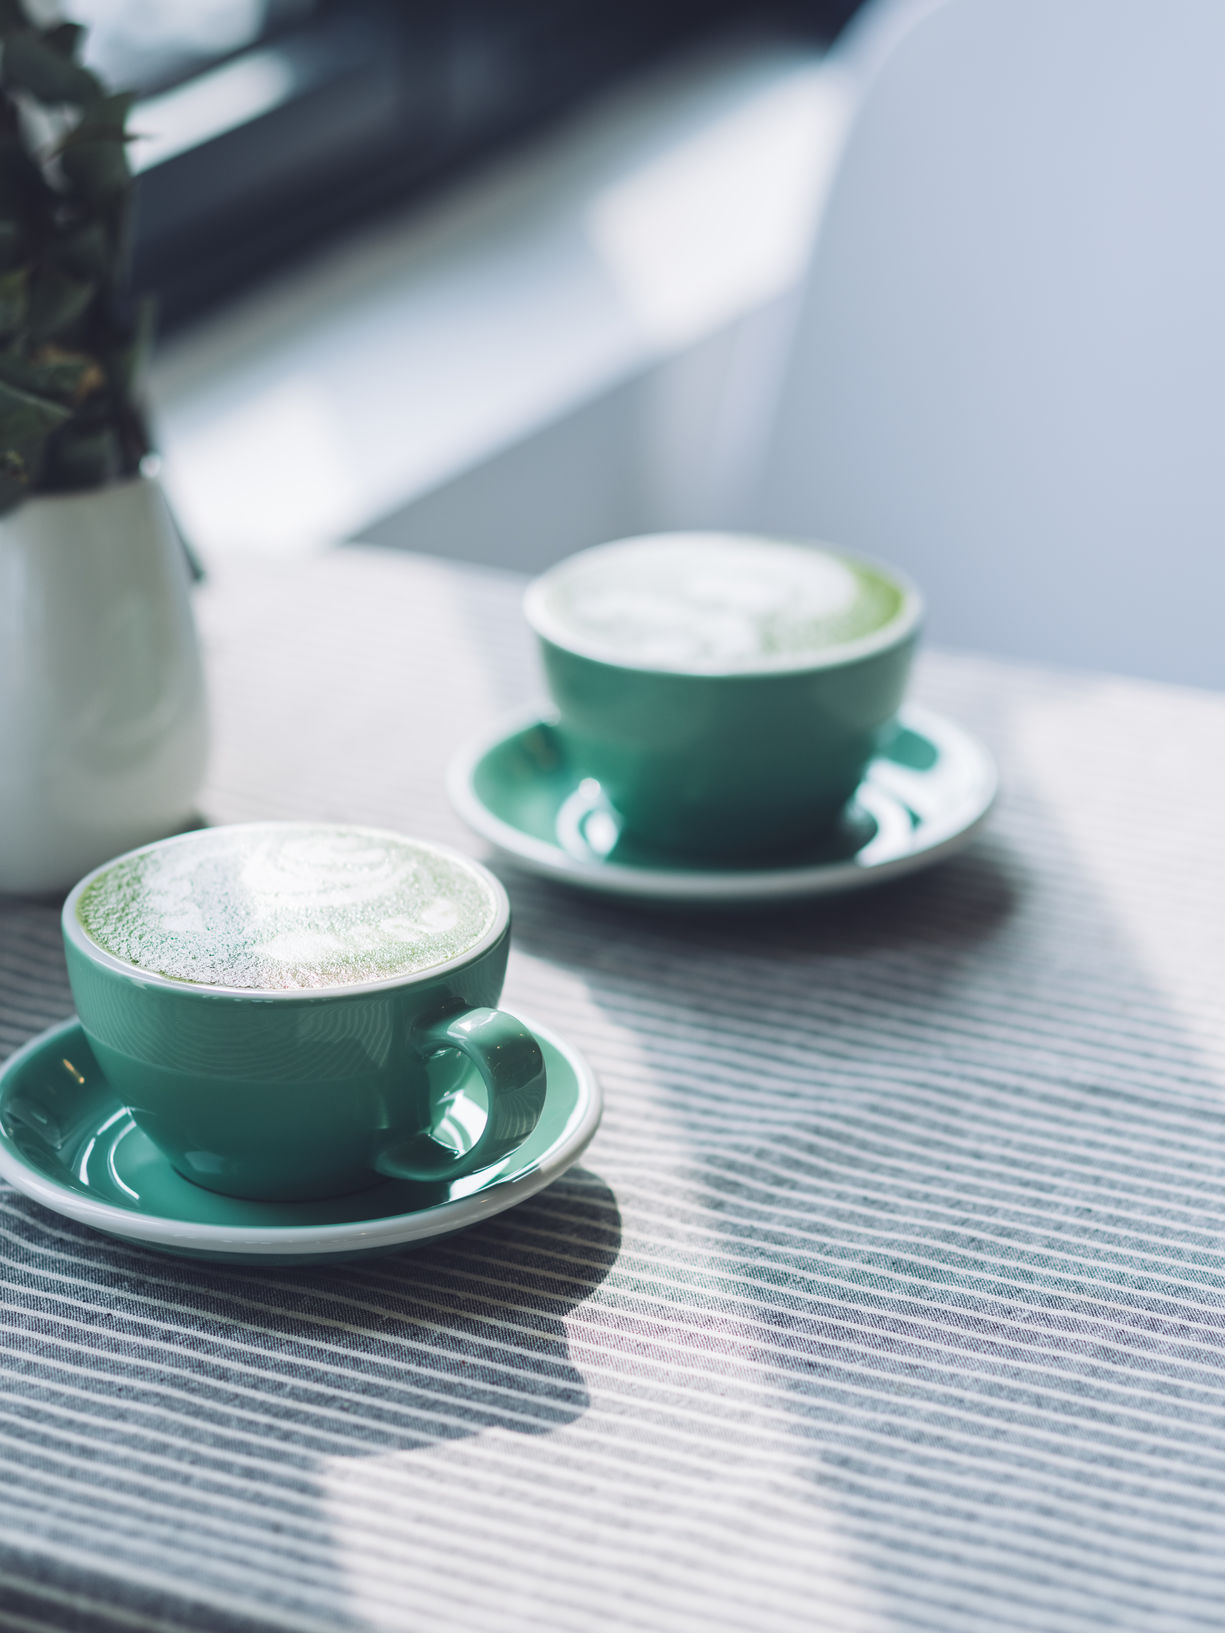 Interior gallery - 9 of 11 - Two Cups Of Coffee With Steam Milk In Green Cups On Table Against Sunlight